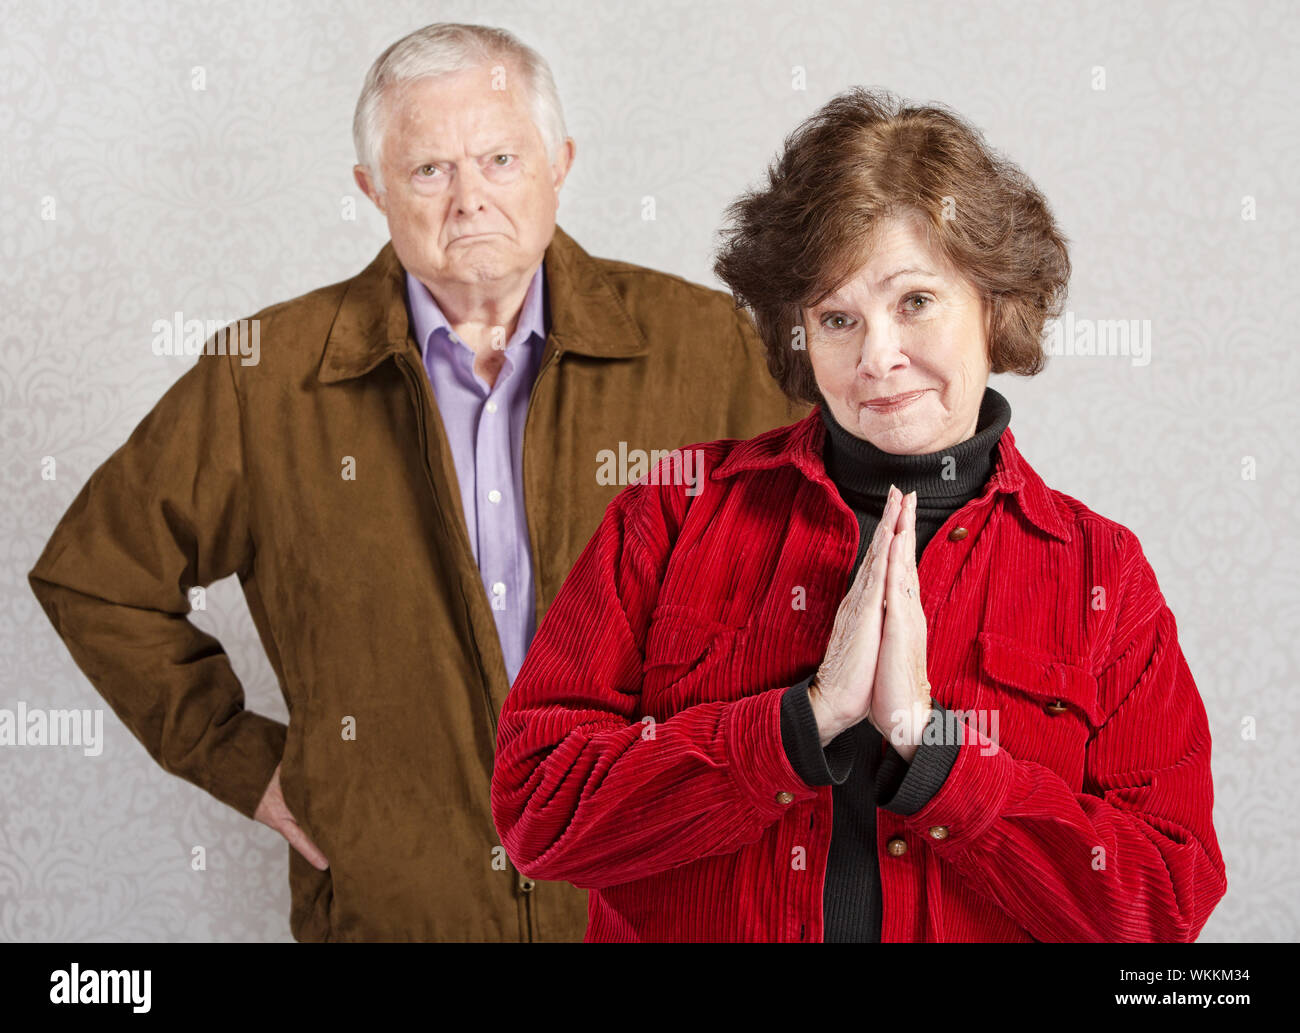 Coy pretty older woman in front of grumpy man Stock Photo